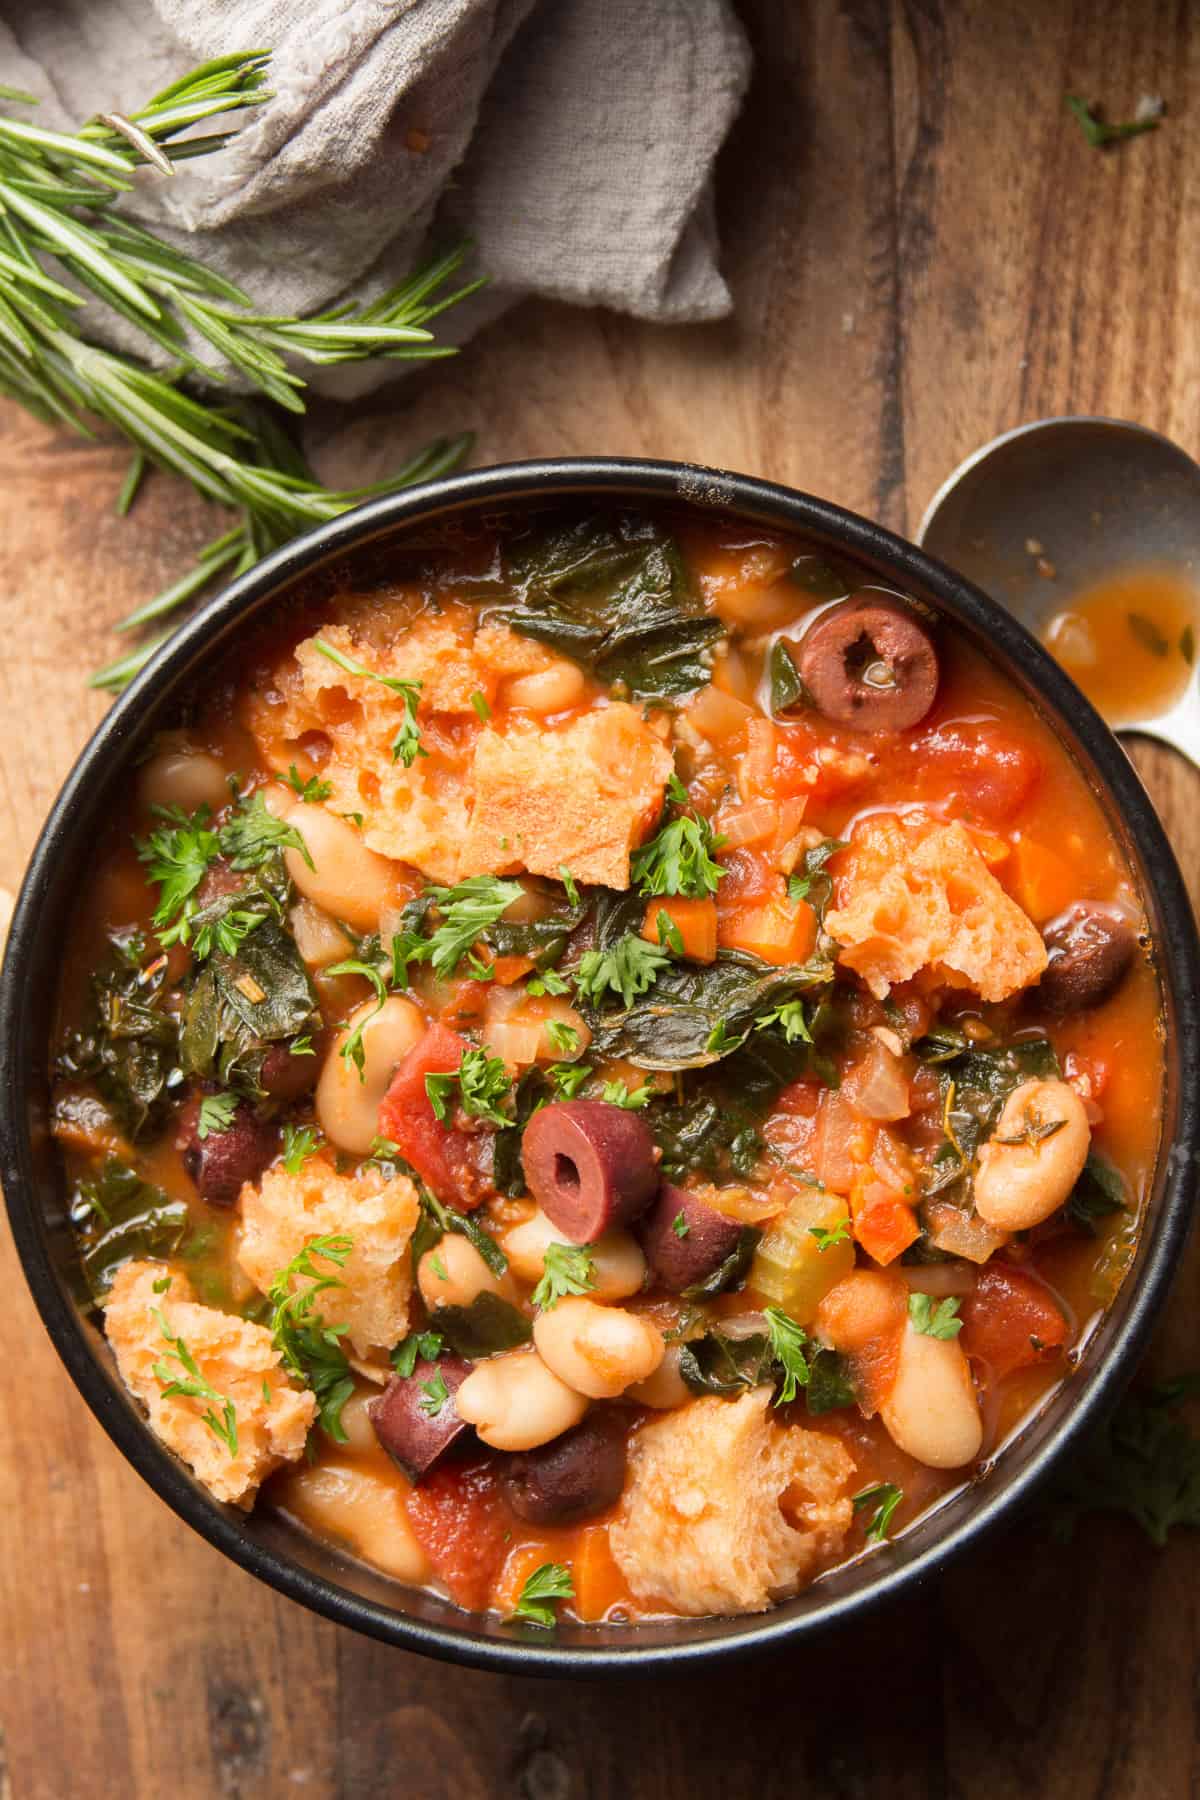 Bowl of Ribollita Soup with Diced Onions, Carrots, Celery Stalks and Cannellini Beans